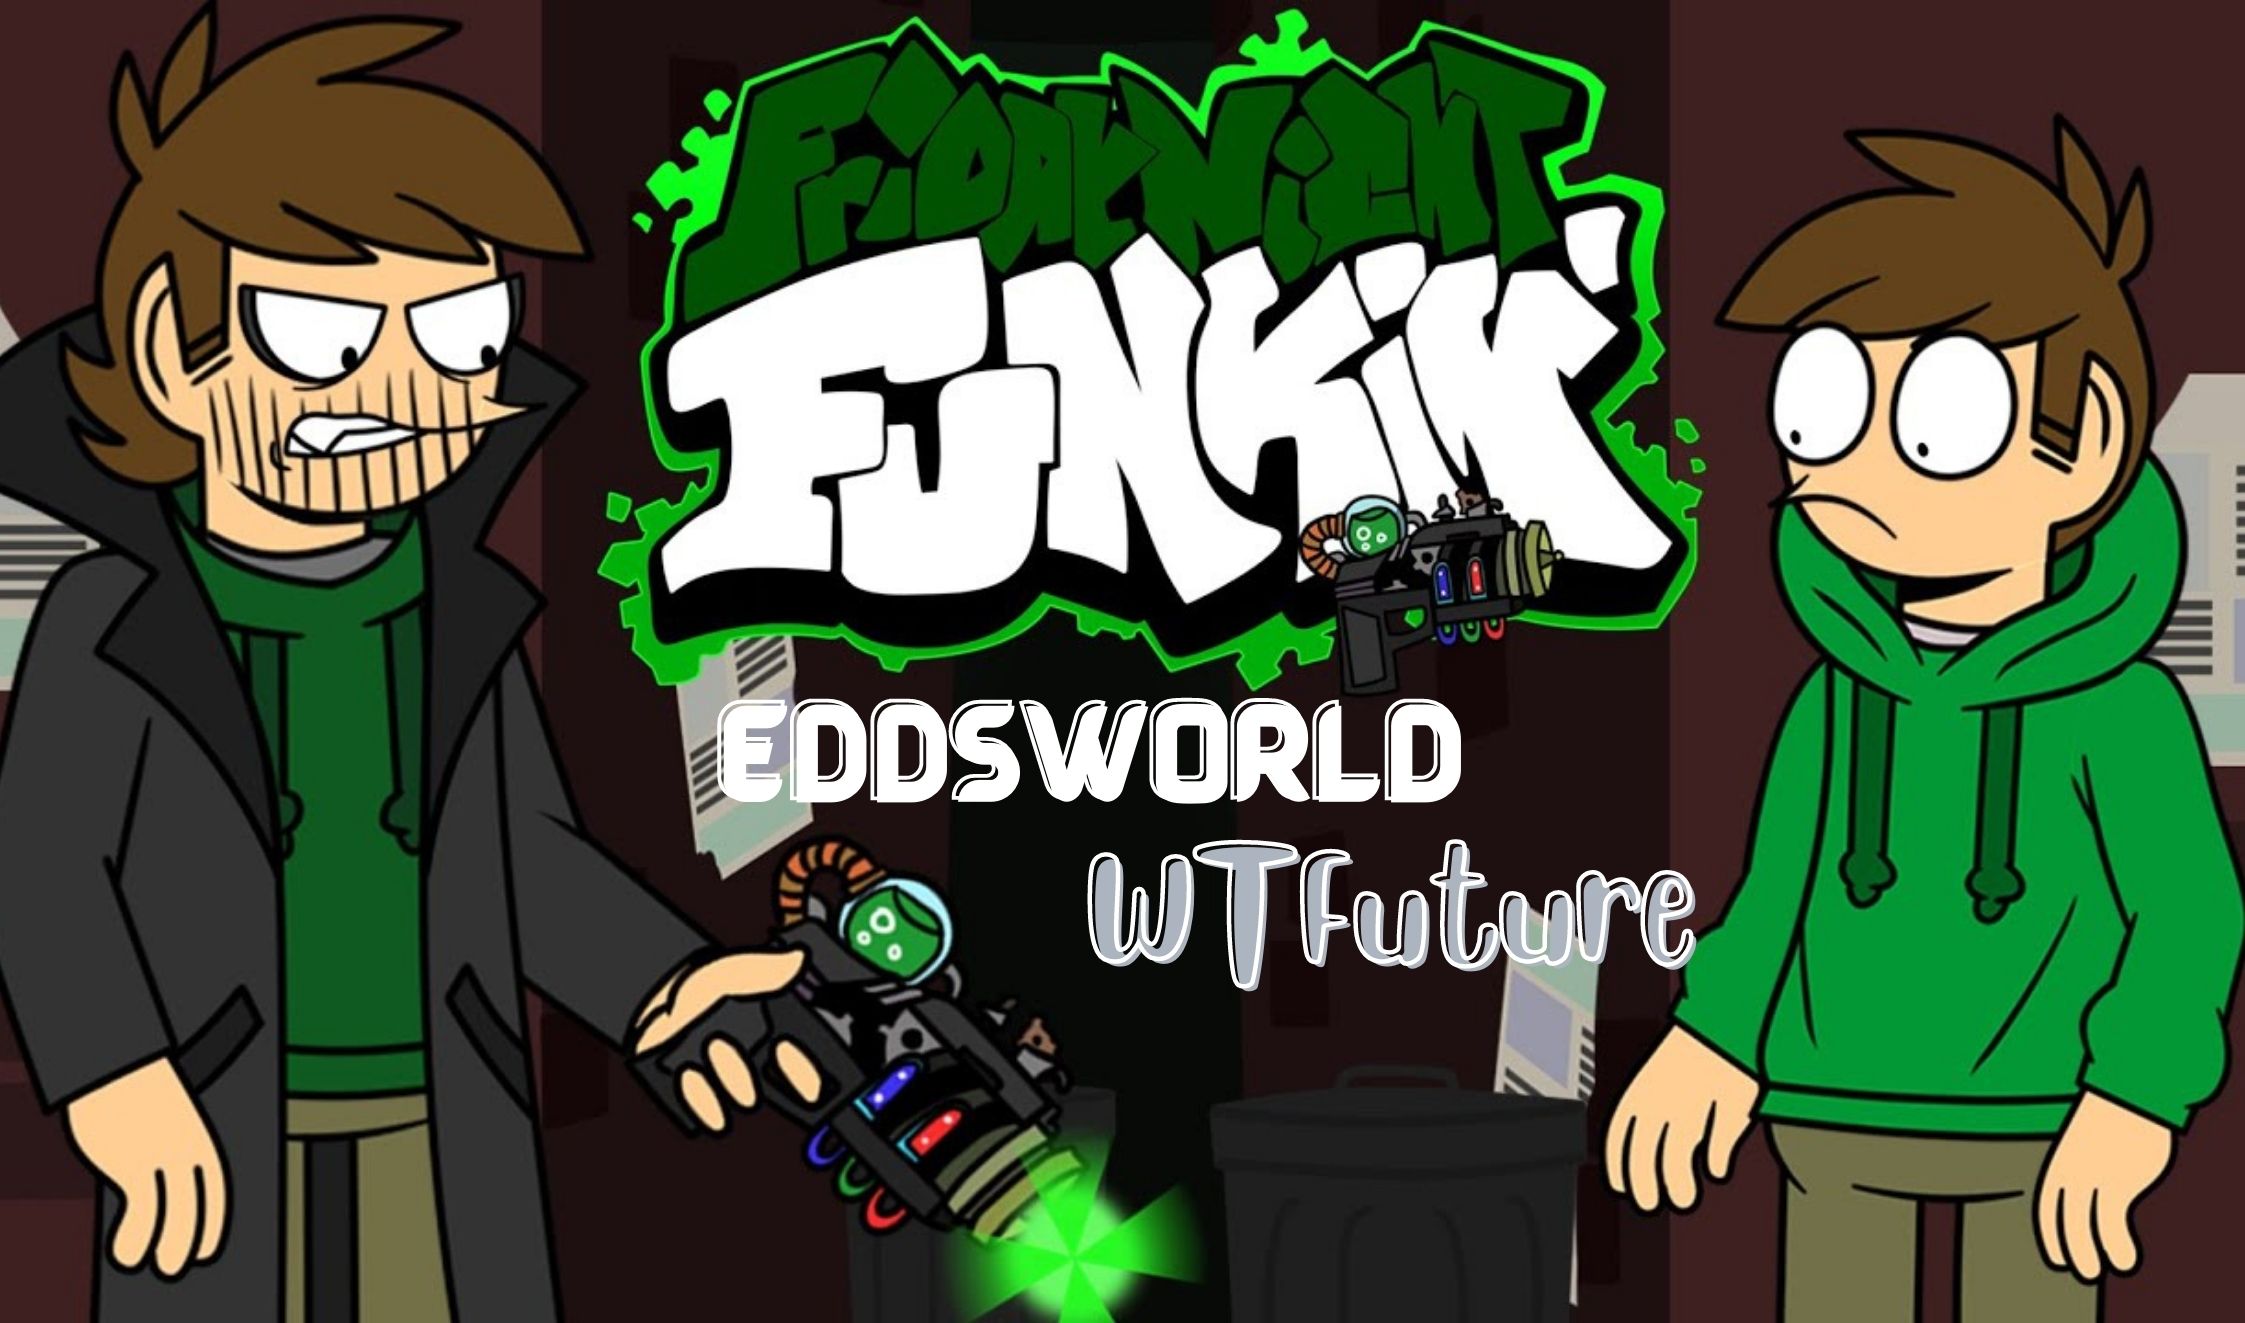 the fact that Eddsworld is included in fnf online is amazing. if